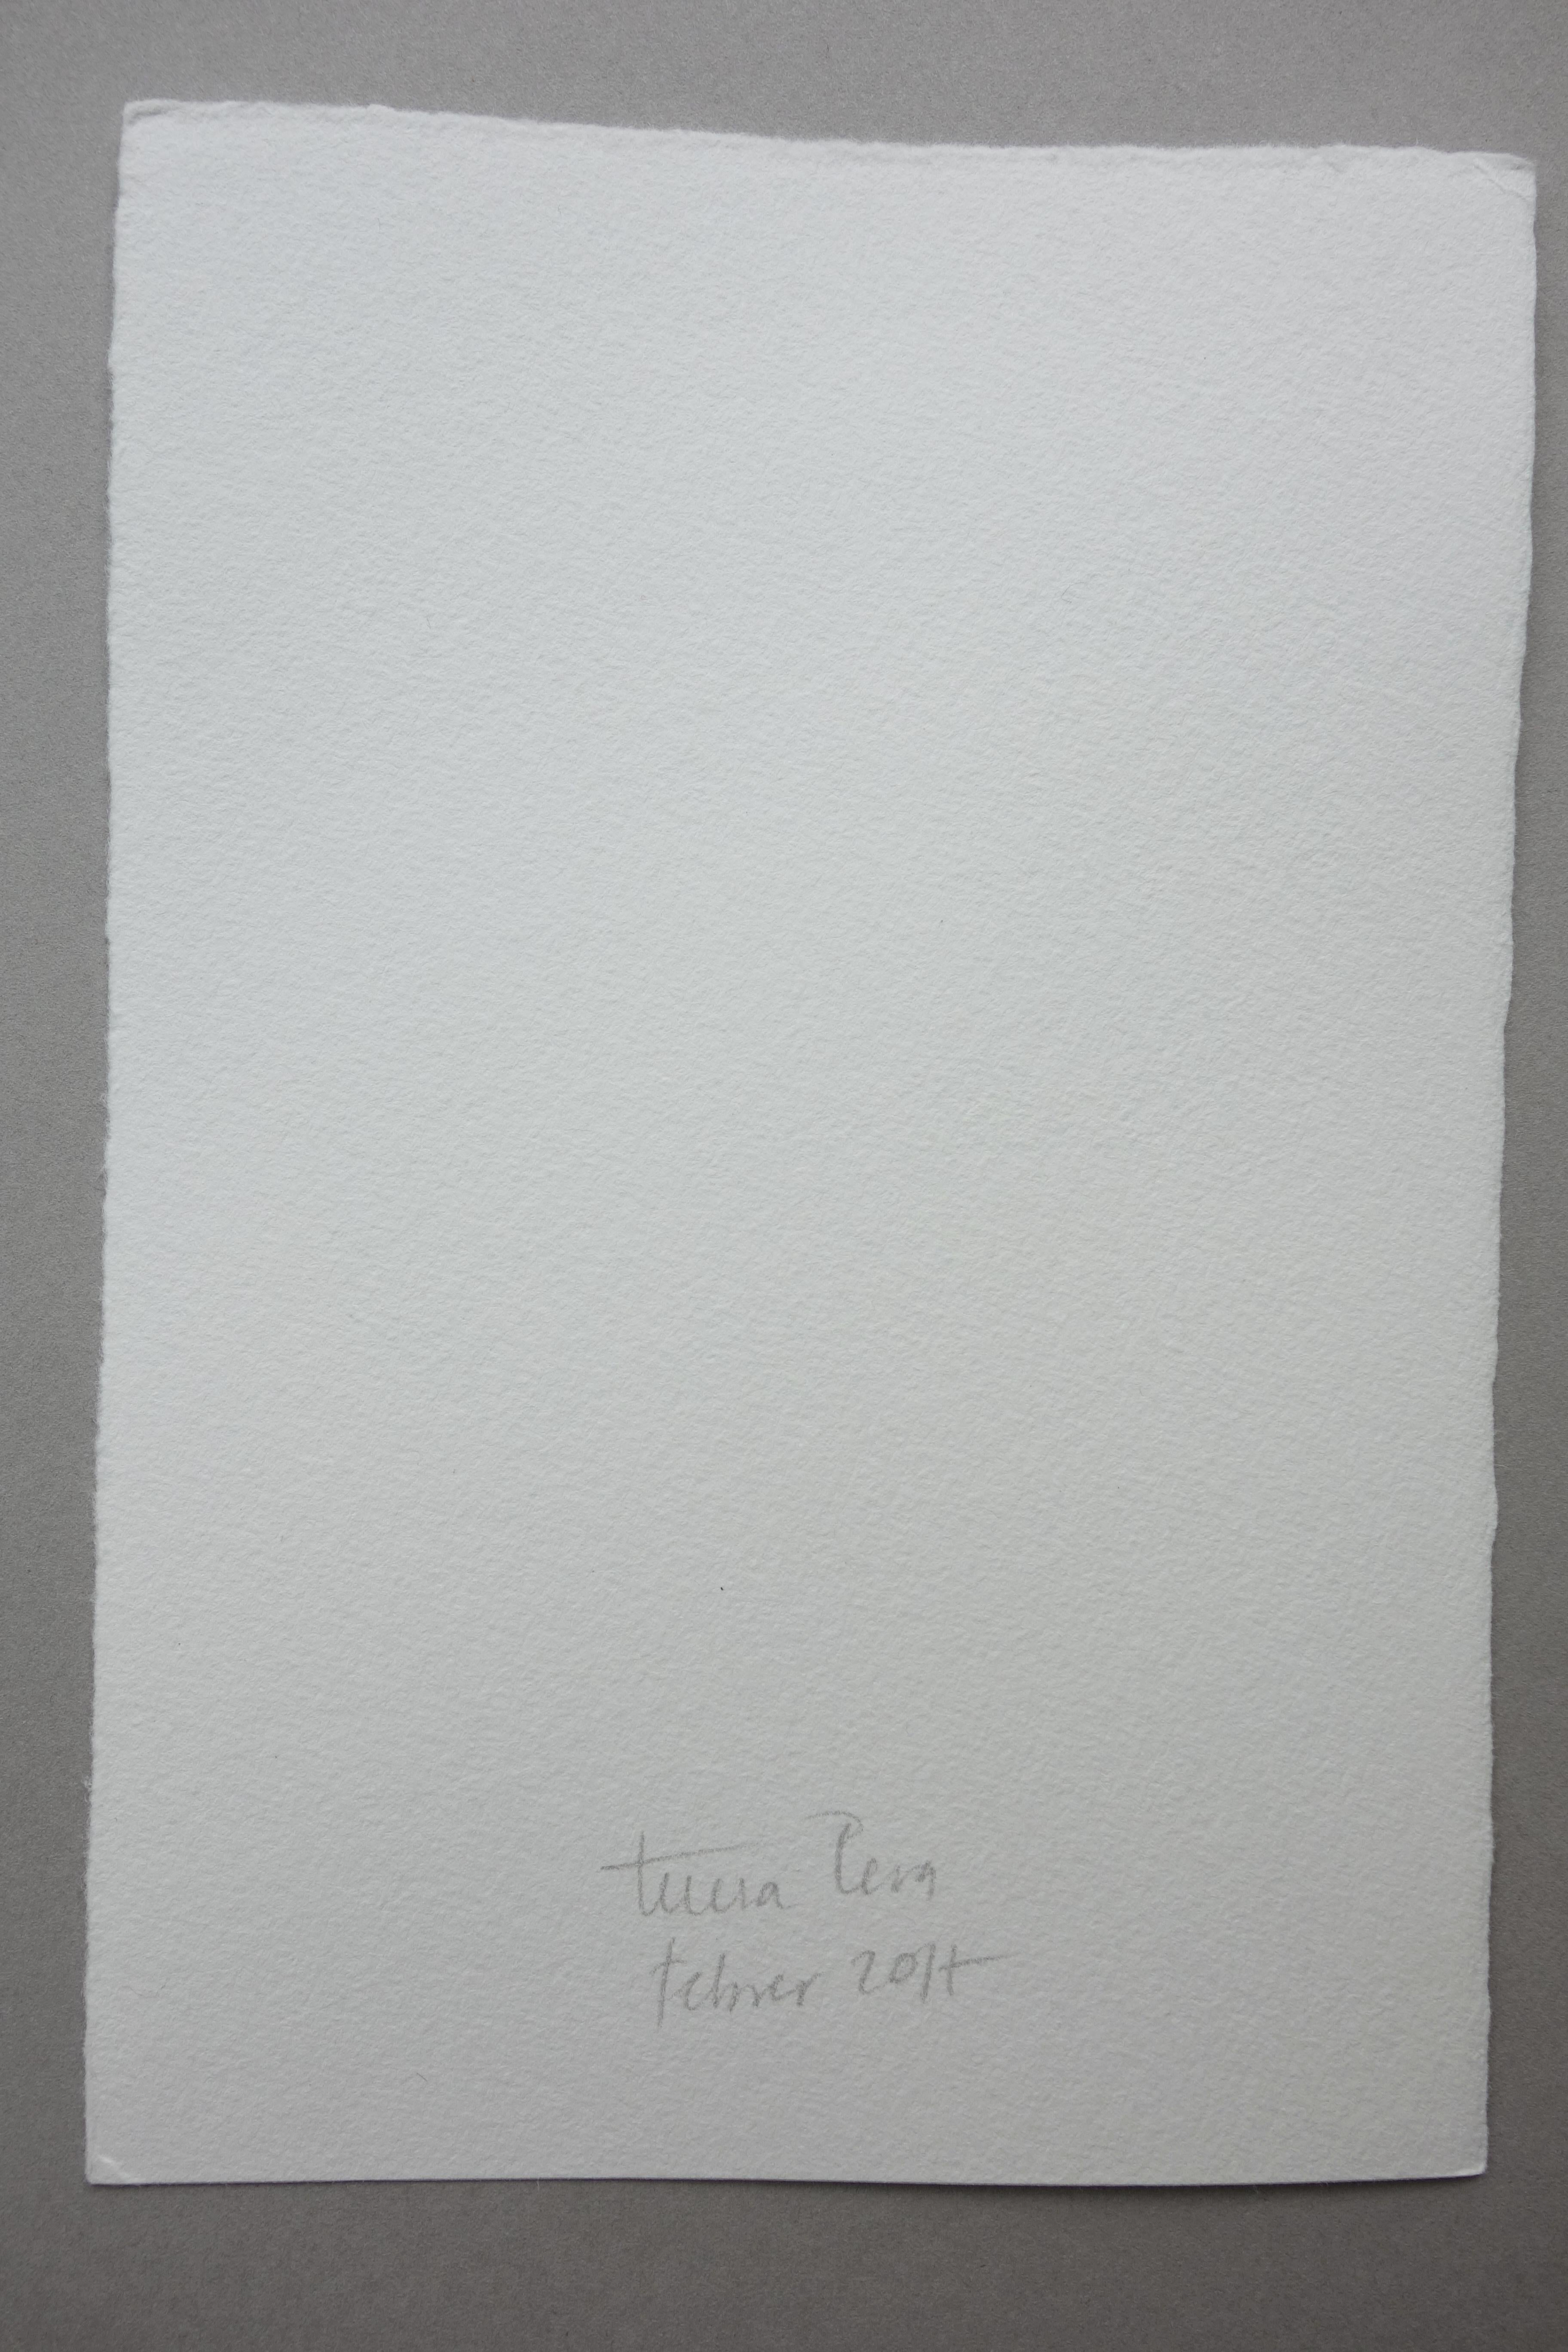 Calligraphy of water - 21st century watercolour - conceptual- Teresa Pera  For Sale 2